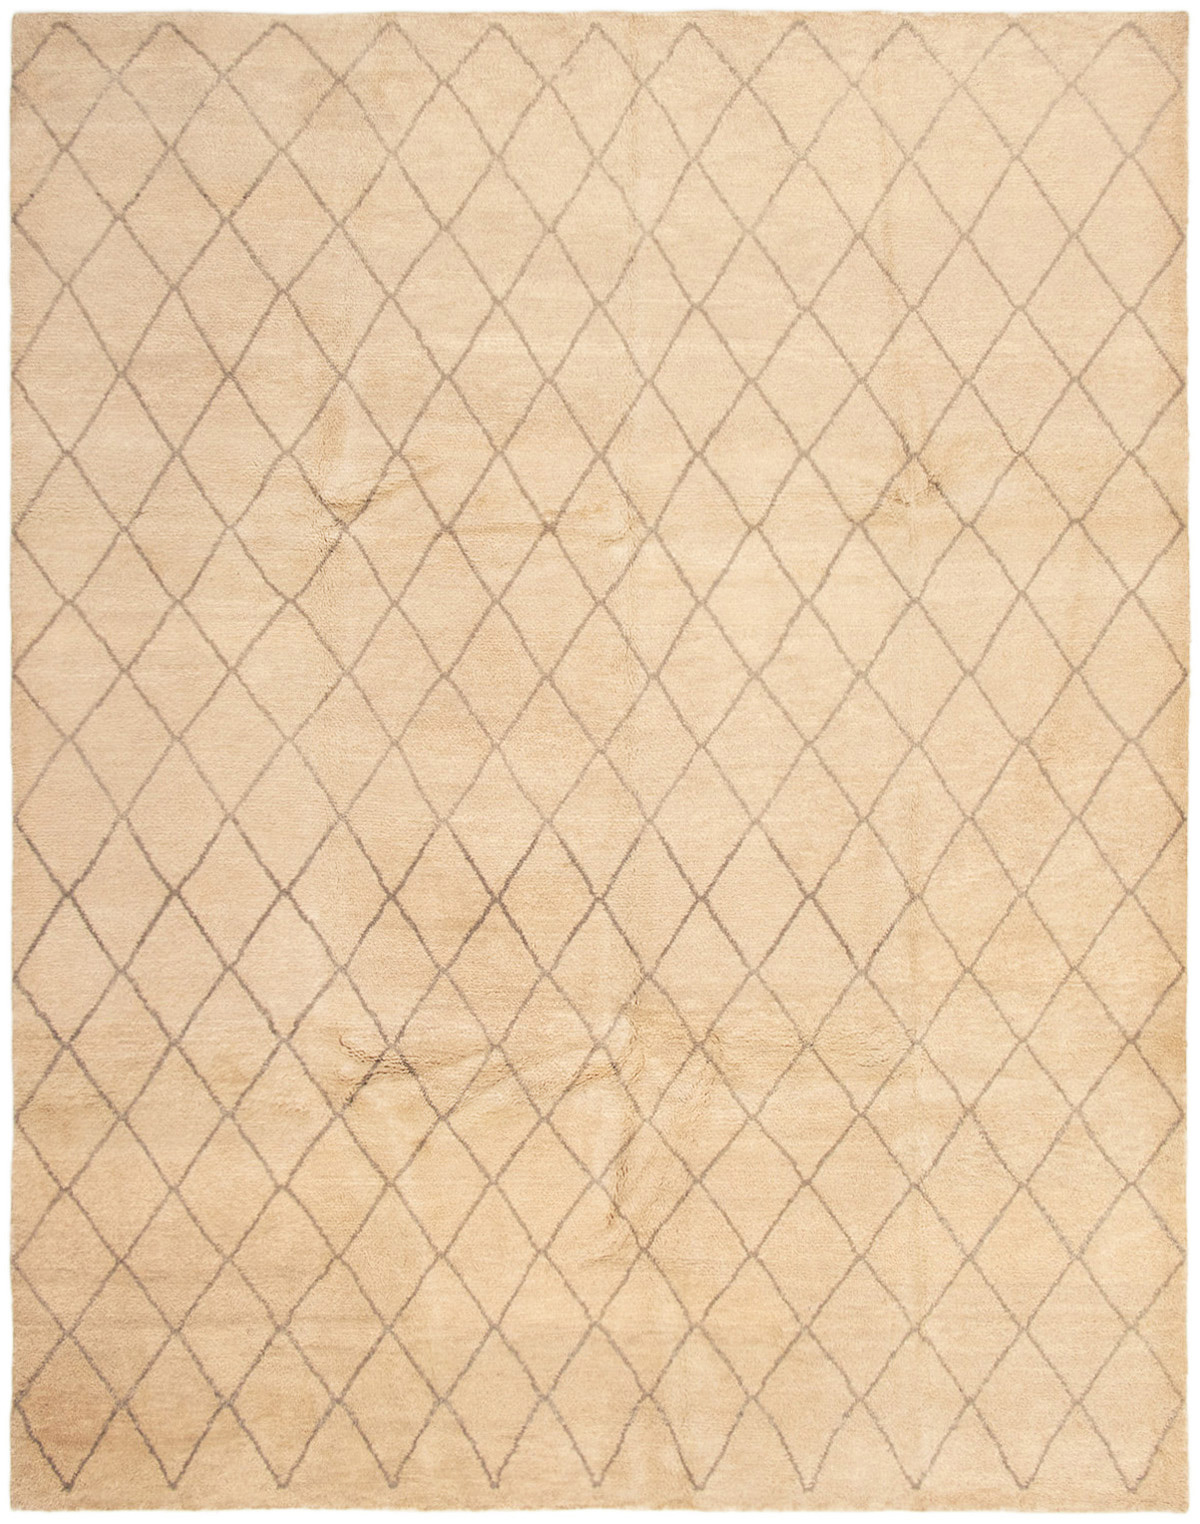 Hand-knotted Arlequin Ivory Wool Rug 9'4" x 12'0" Size: 9'4" x 12'0"  